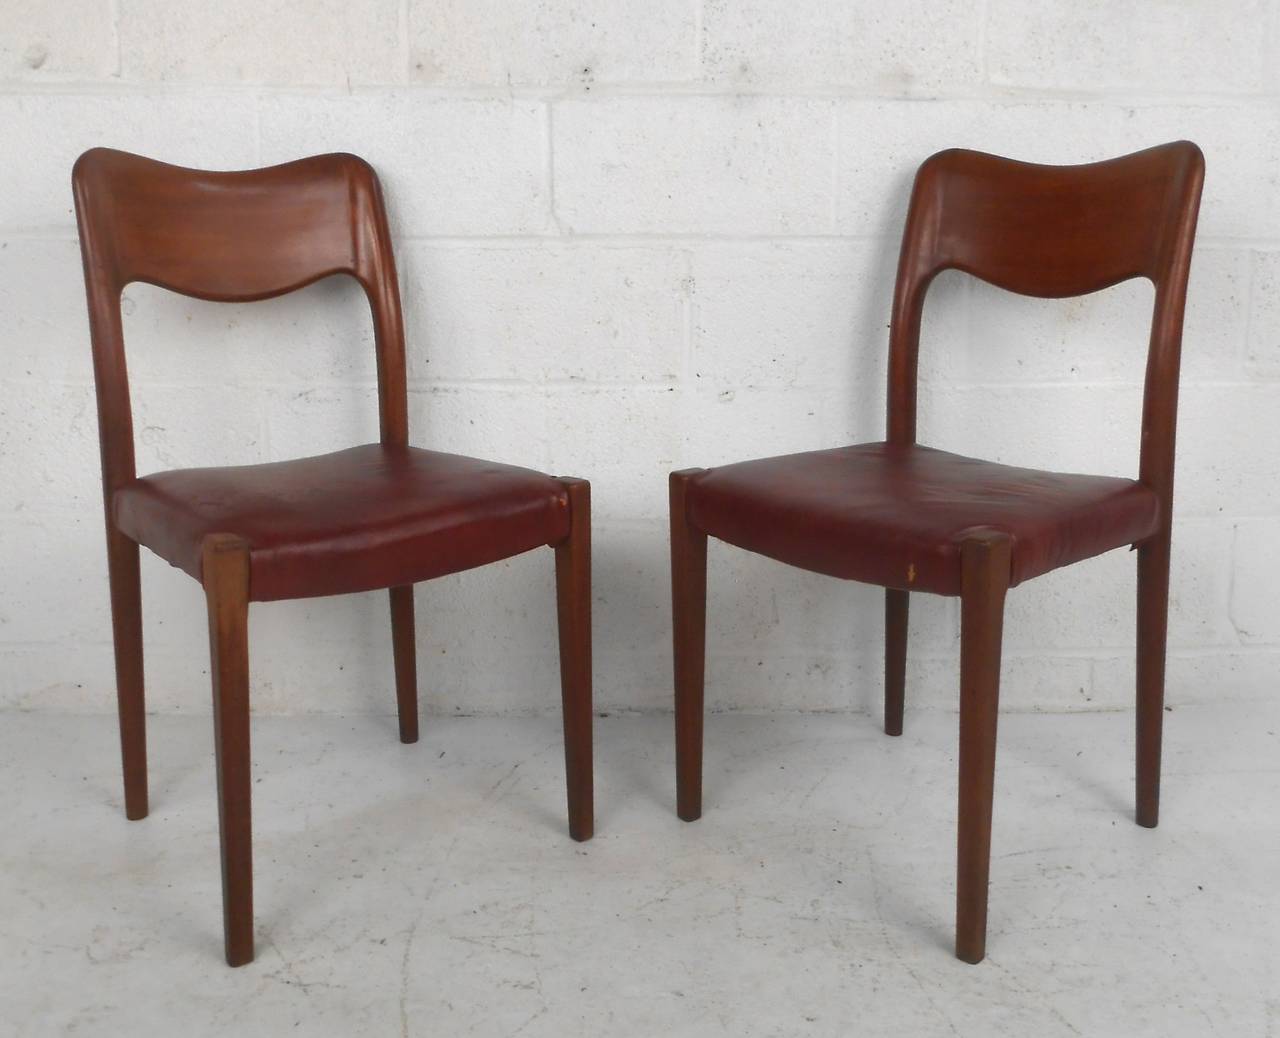 This set of six beautiful leather and rosewood dining chairs includes two armchairs in the tremendous style and design of Niels Otto Møller. Sculpted seat backs and a wonderful rosewood finish set this set apart from other Midcentury seating